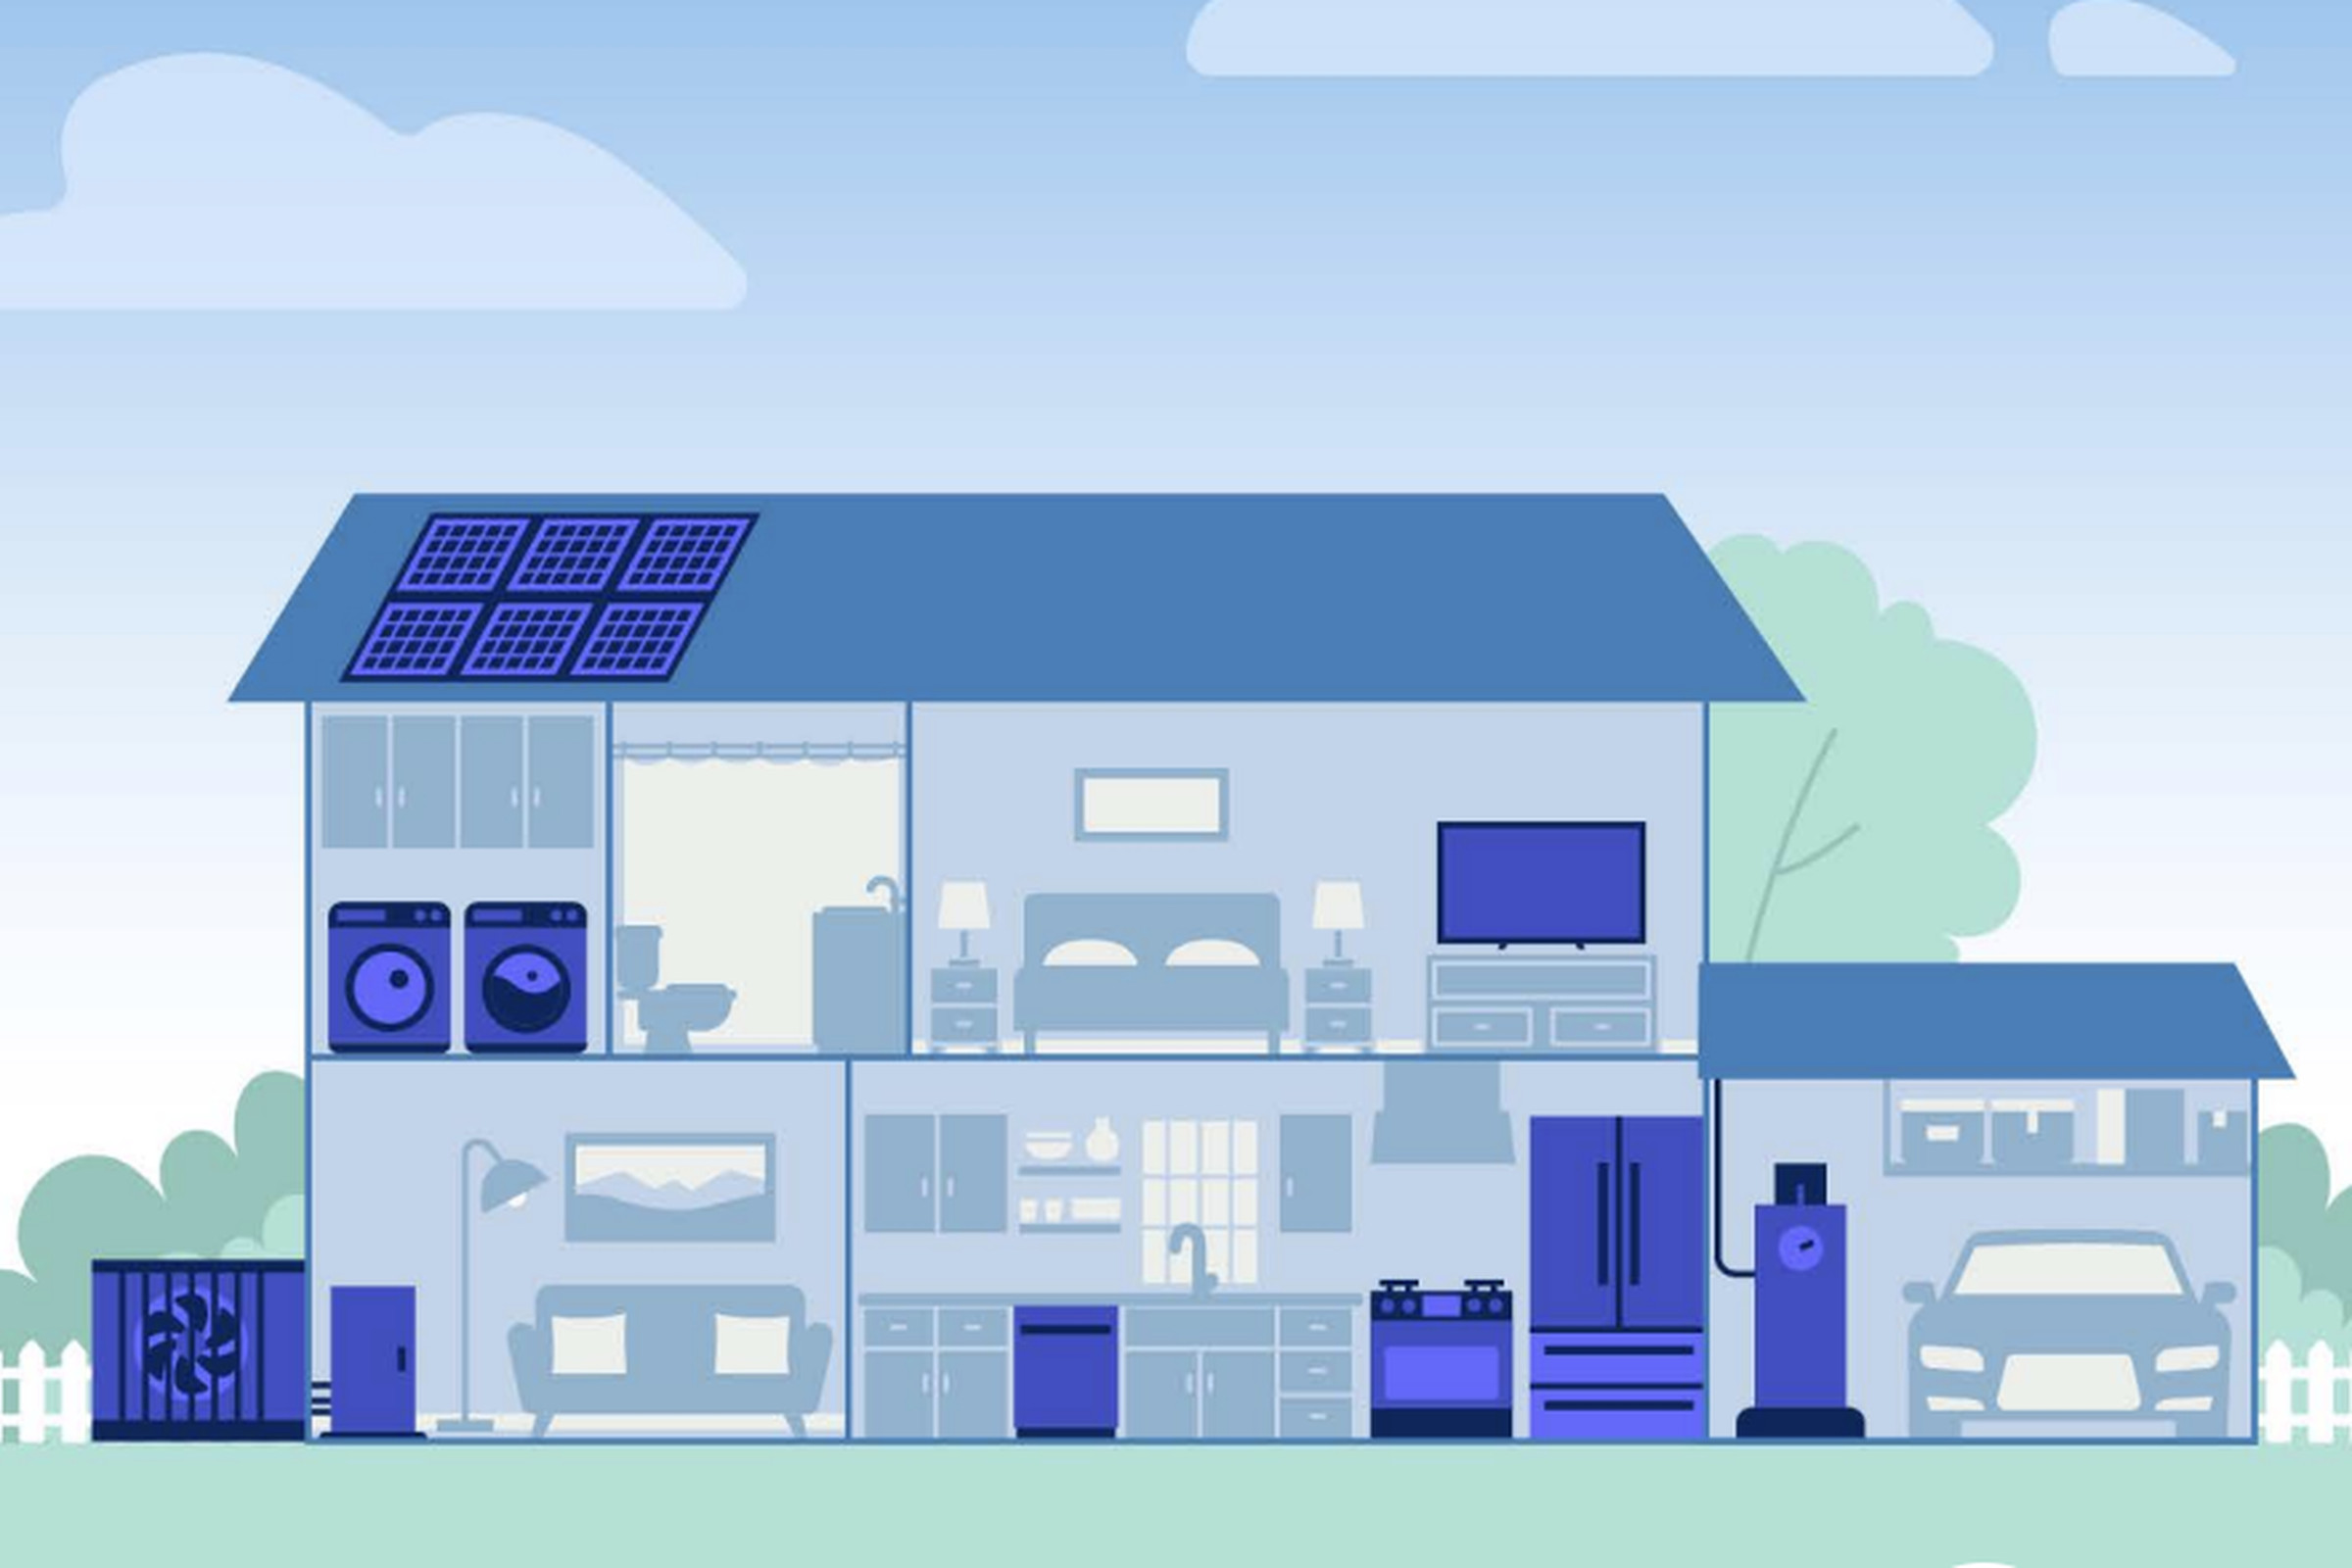 Smart fridges, washing machines, and more can connect to the smart grid to adjust energy use based on demand and save you cash.